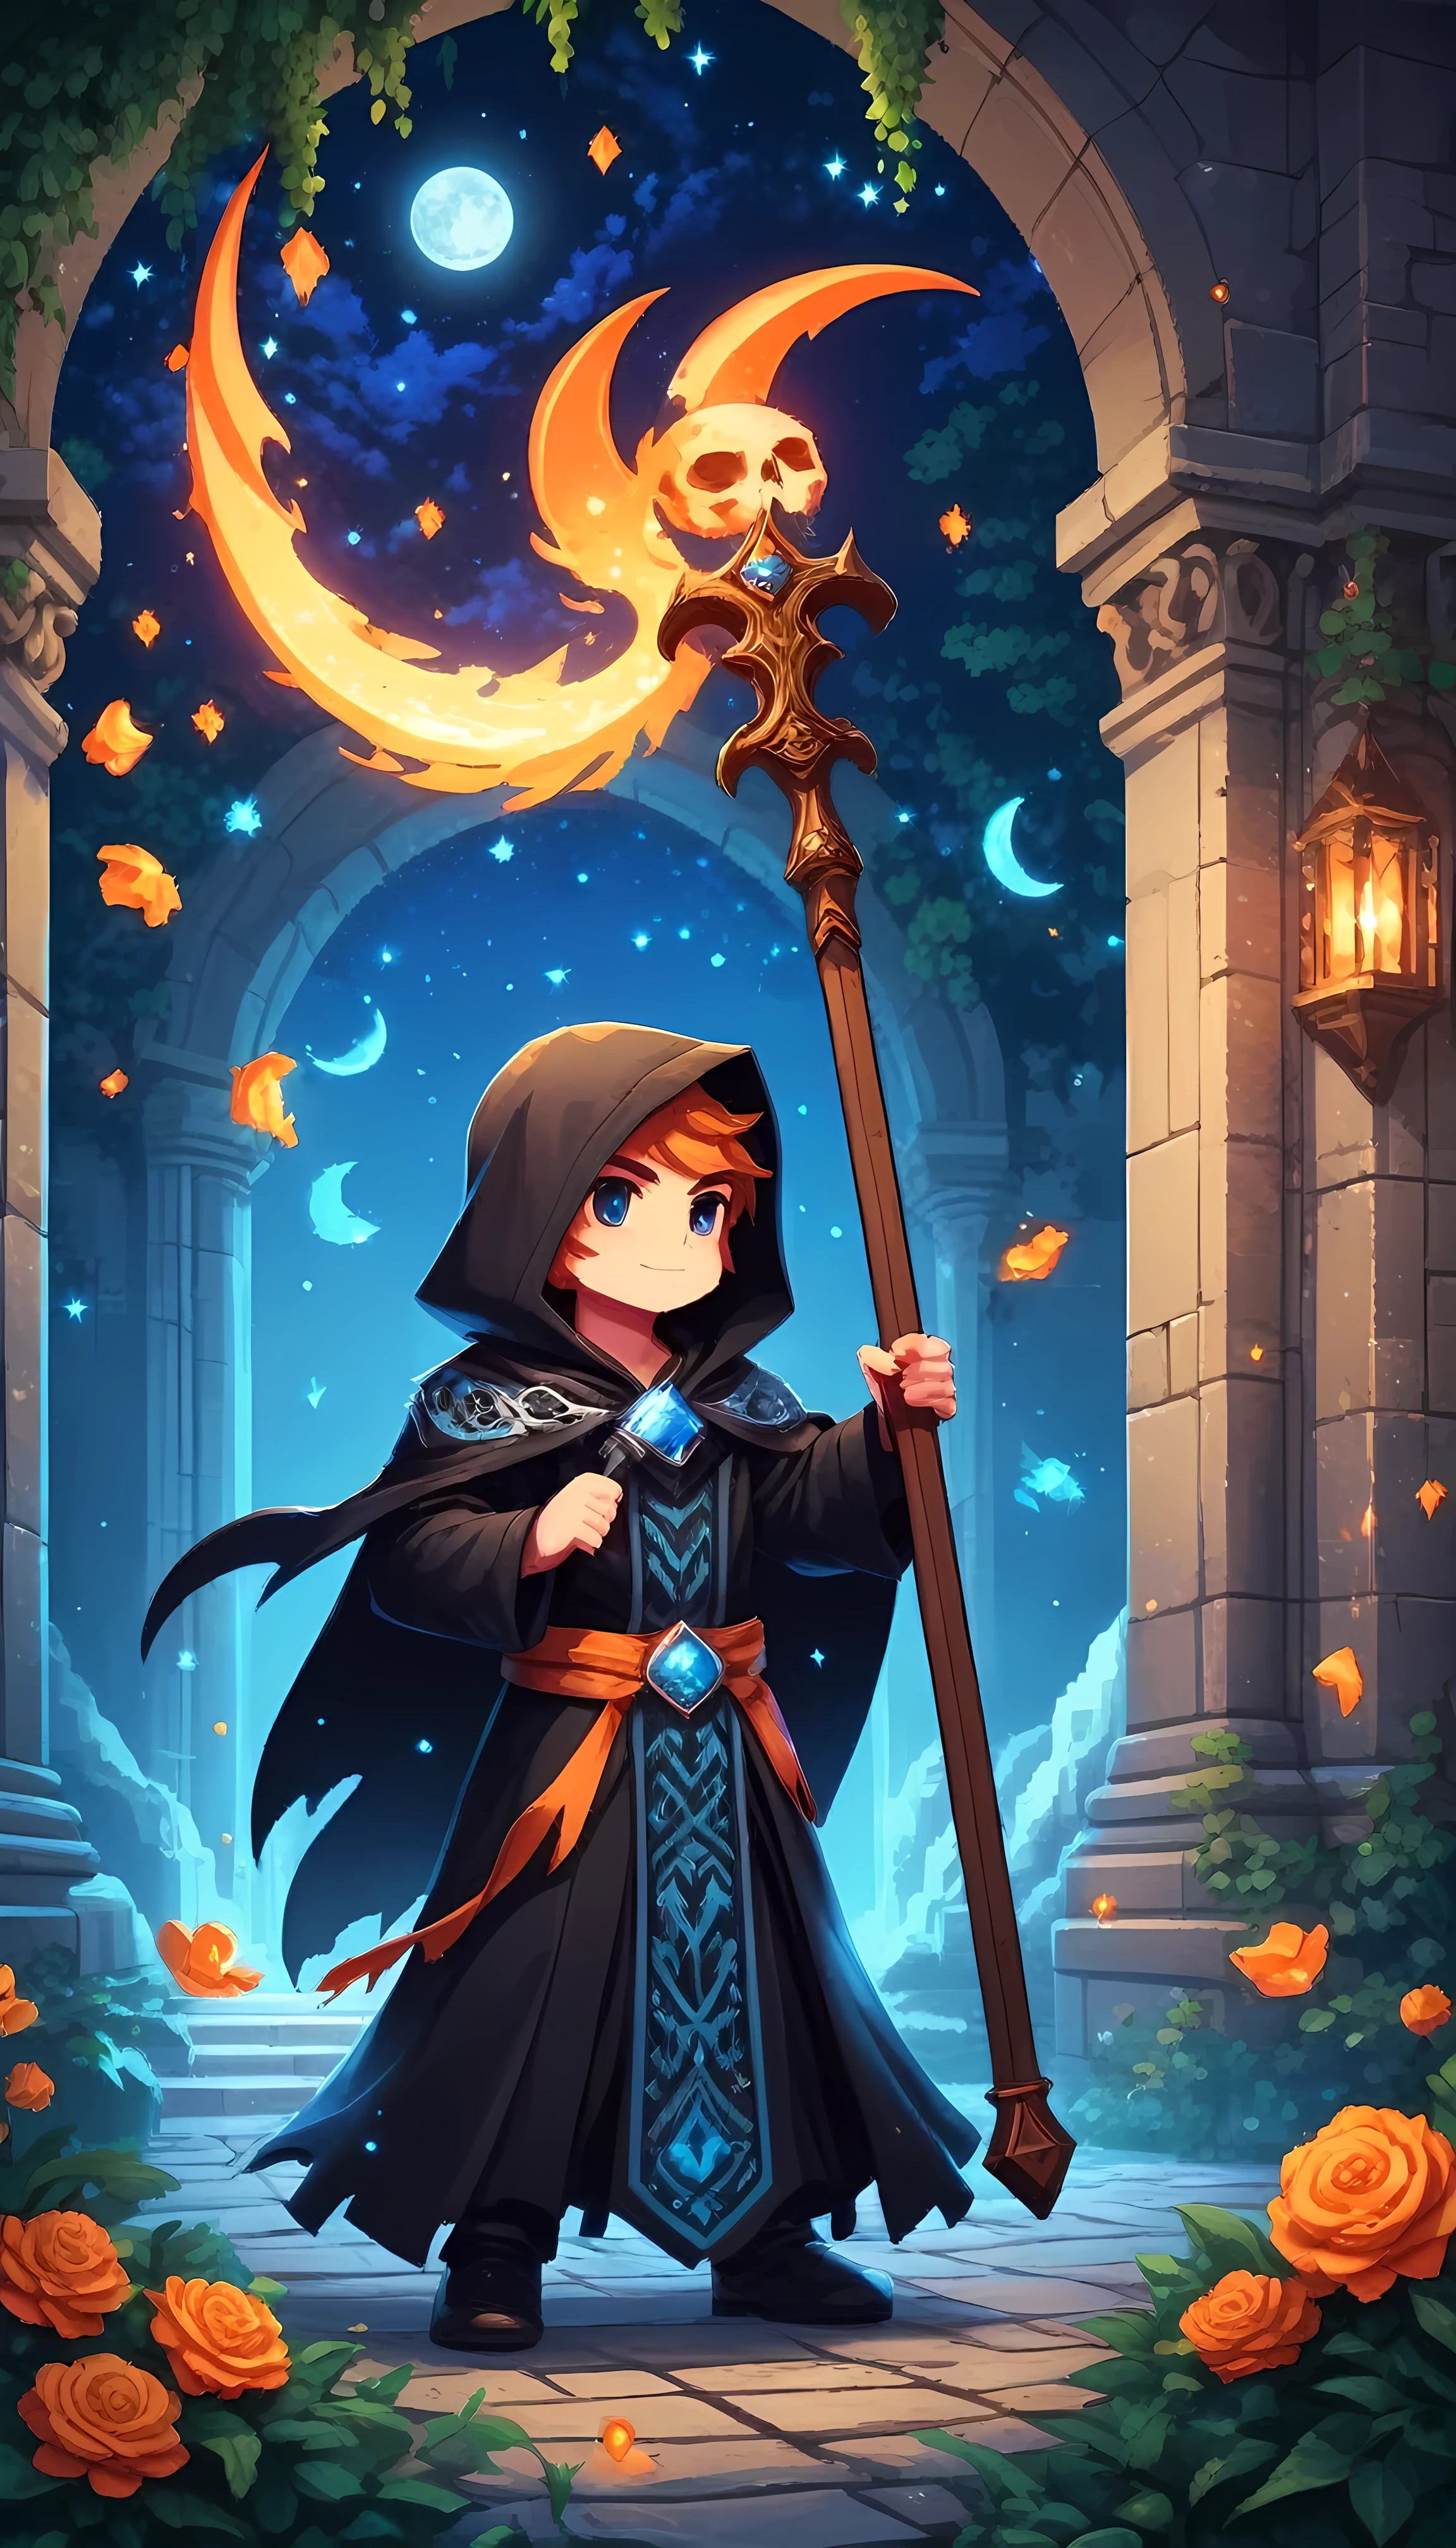 Bright epic professional (cute cartoon pixel illustration:1.2), (masterpiece in maximum 16K resolution, superb quality, ultra detailed:1.3), grip reaper holding a long (decorative scythe:1.2) with (light blue magic orbs), (holding a single rose), standing near a (grand tombstone), wearing a full dark cloak with (glowing runes), amidst forest cemetery, sparkles, starry night with crescent moon.
